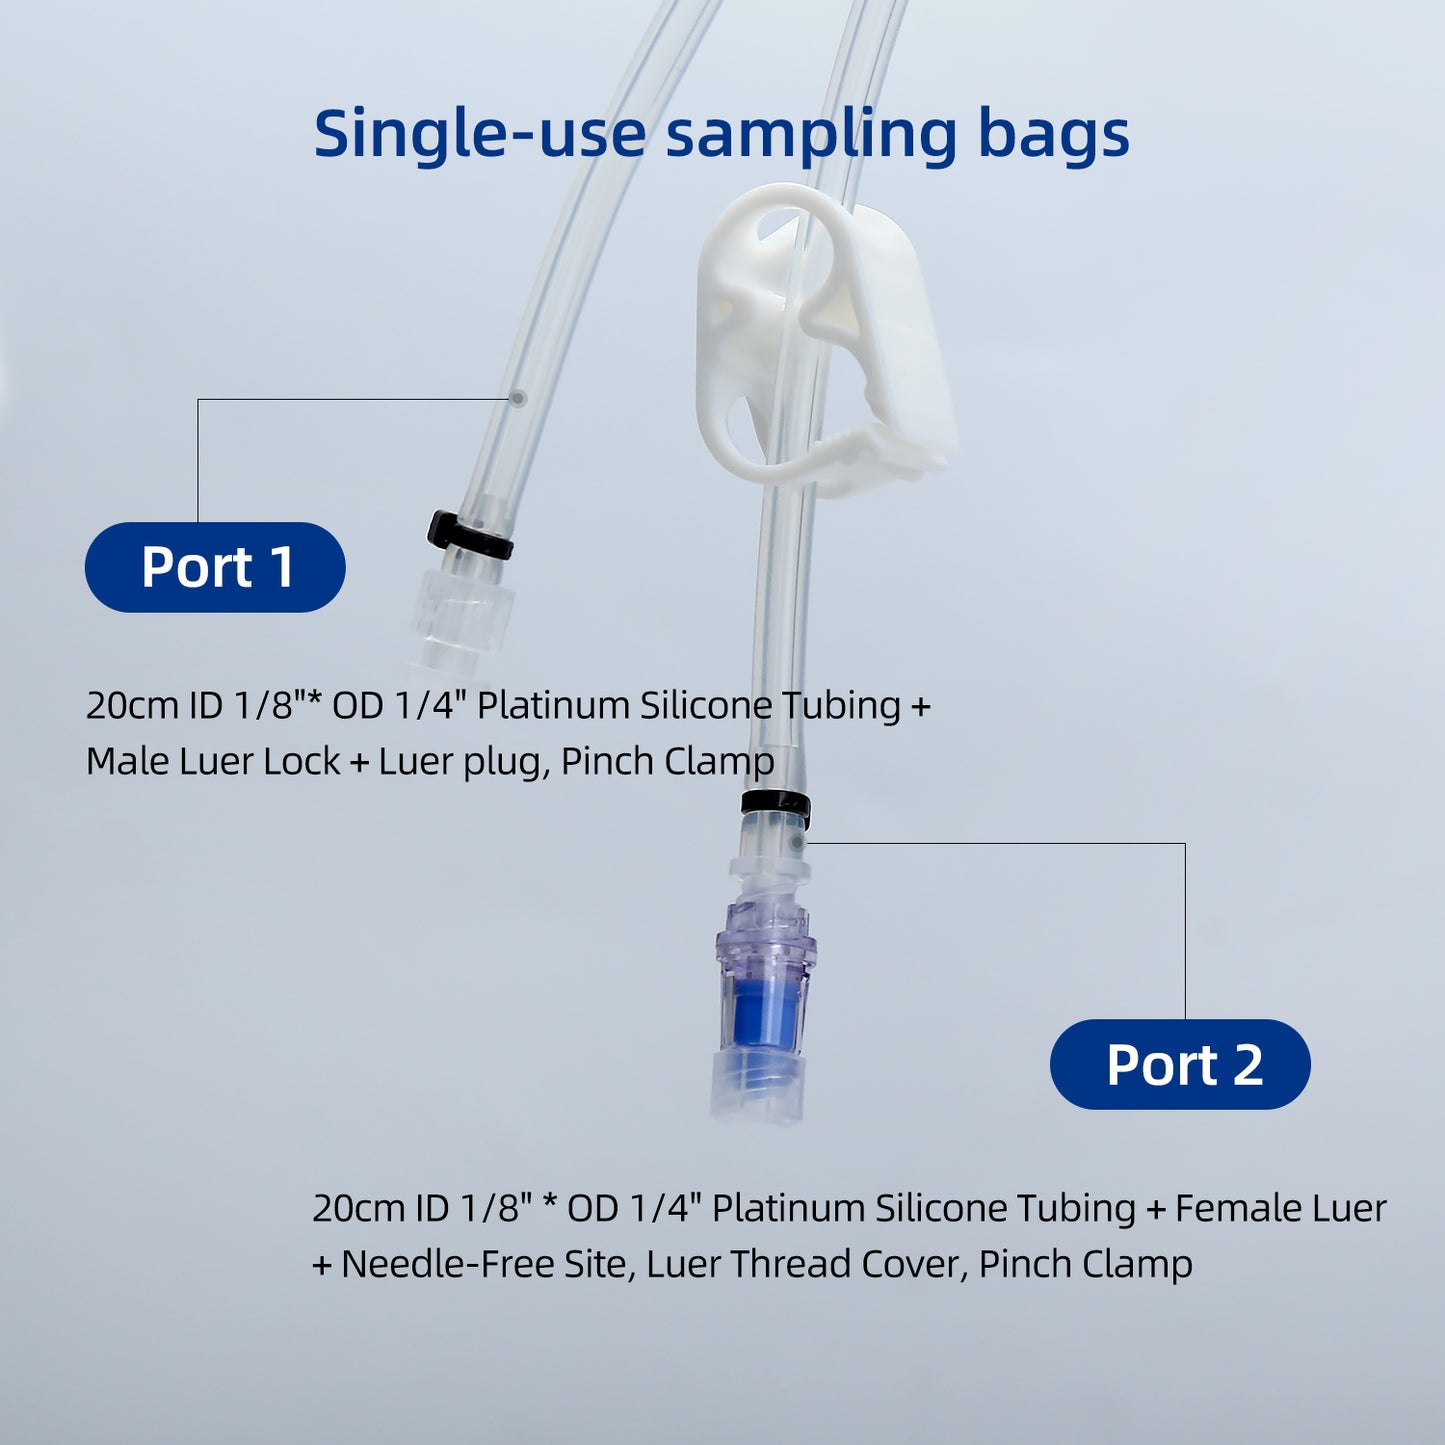 COBETTER 50mL Sampling Bag with 1/8"ID x 1/4"OD Tubing Sterile by Gamma Irradiation